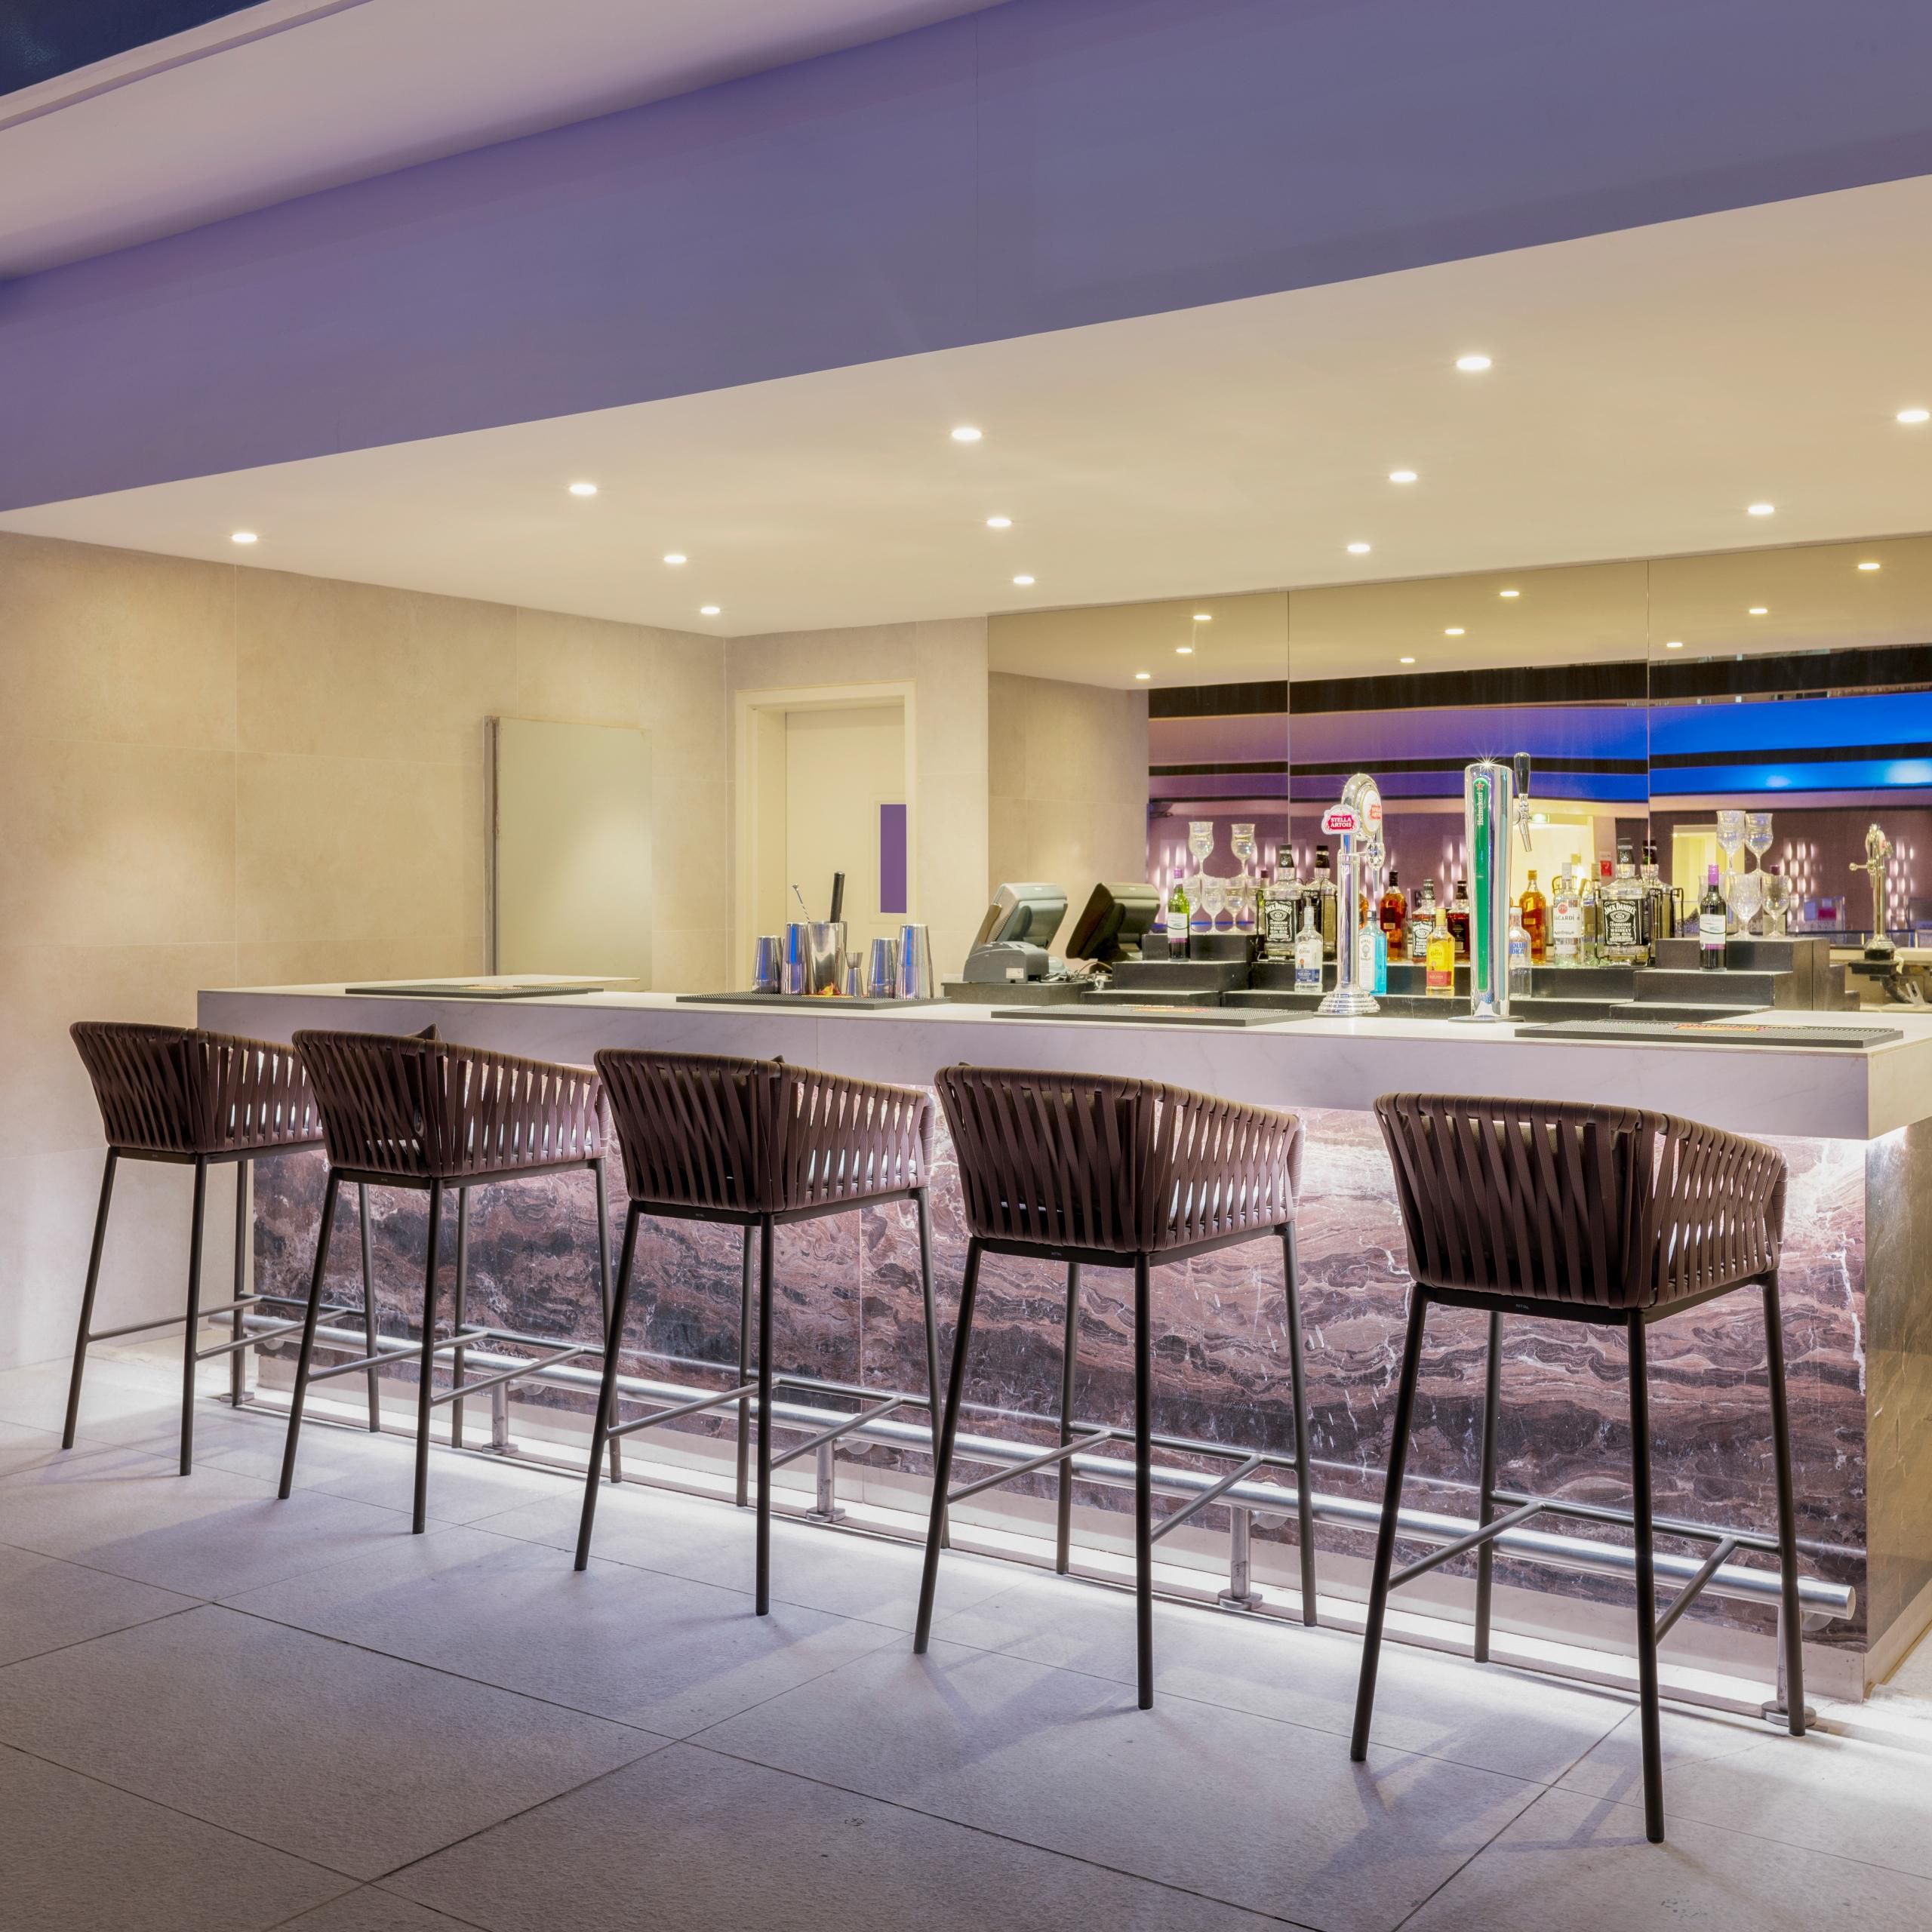 Liquidity poolside lounge has a bar and restaurant seating options